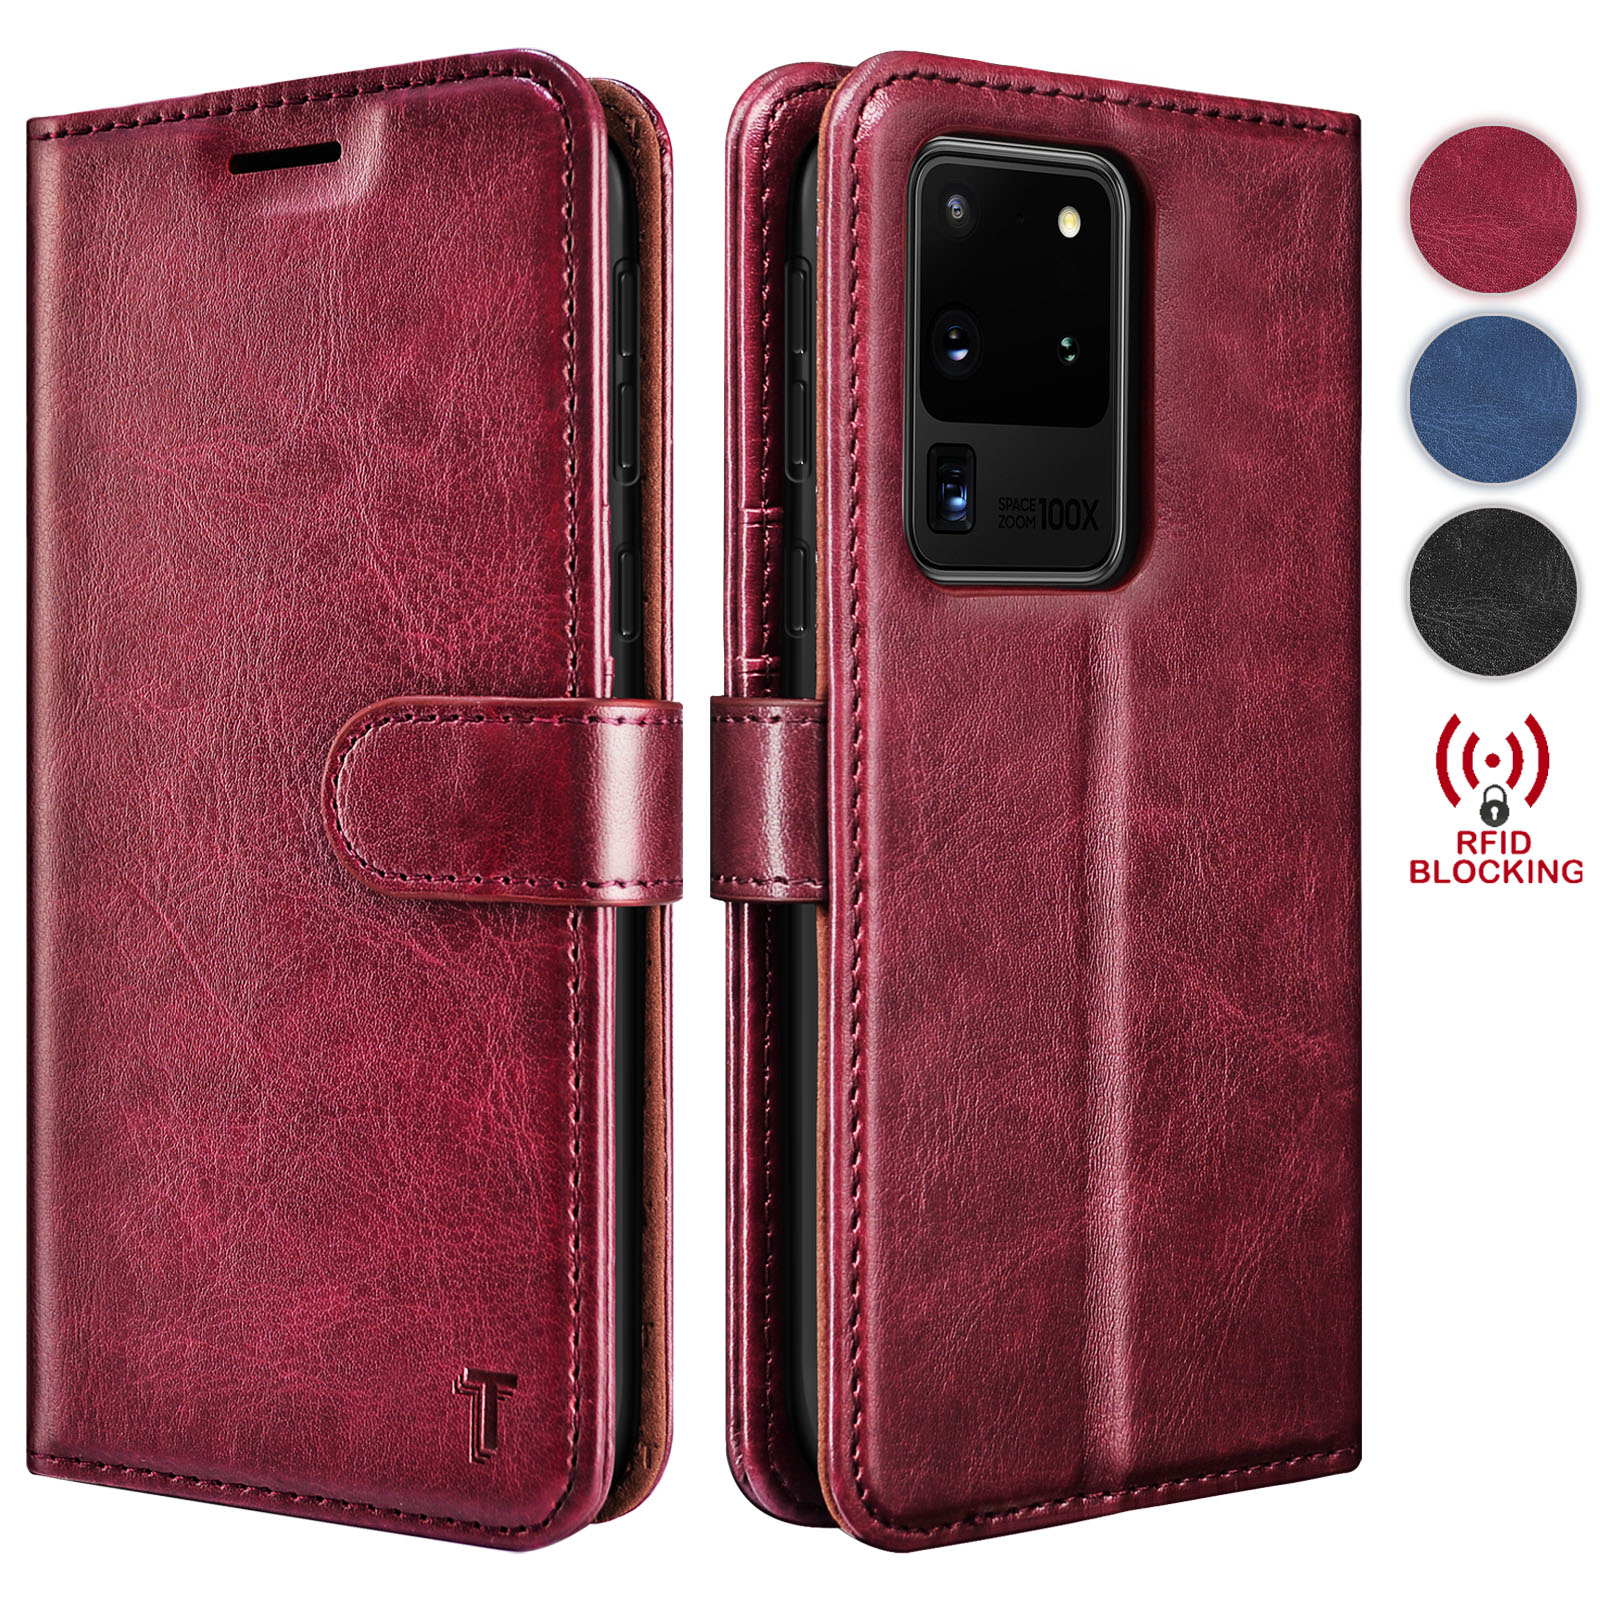 Tekcoo Wallet Cases for Galaxy S20 S20+ S20 Ultra S20 Plus 5G Premium Vegan Leather [RFID Blocking] Luxury ID Cash Credit Card Slots Holder Carrying Pouch Phone Folio Flip Cover [Wine Red] - image 1 of 7